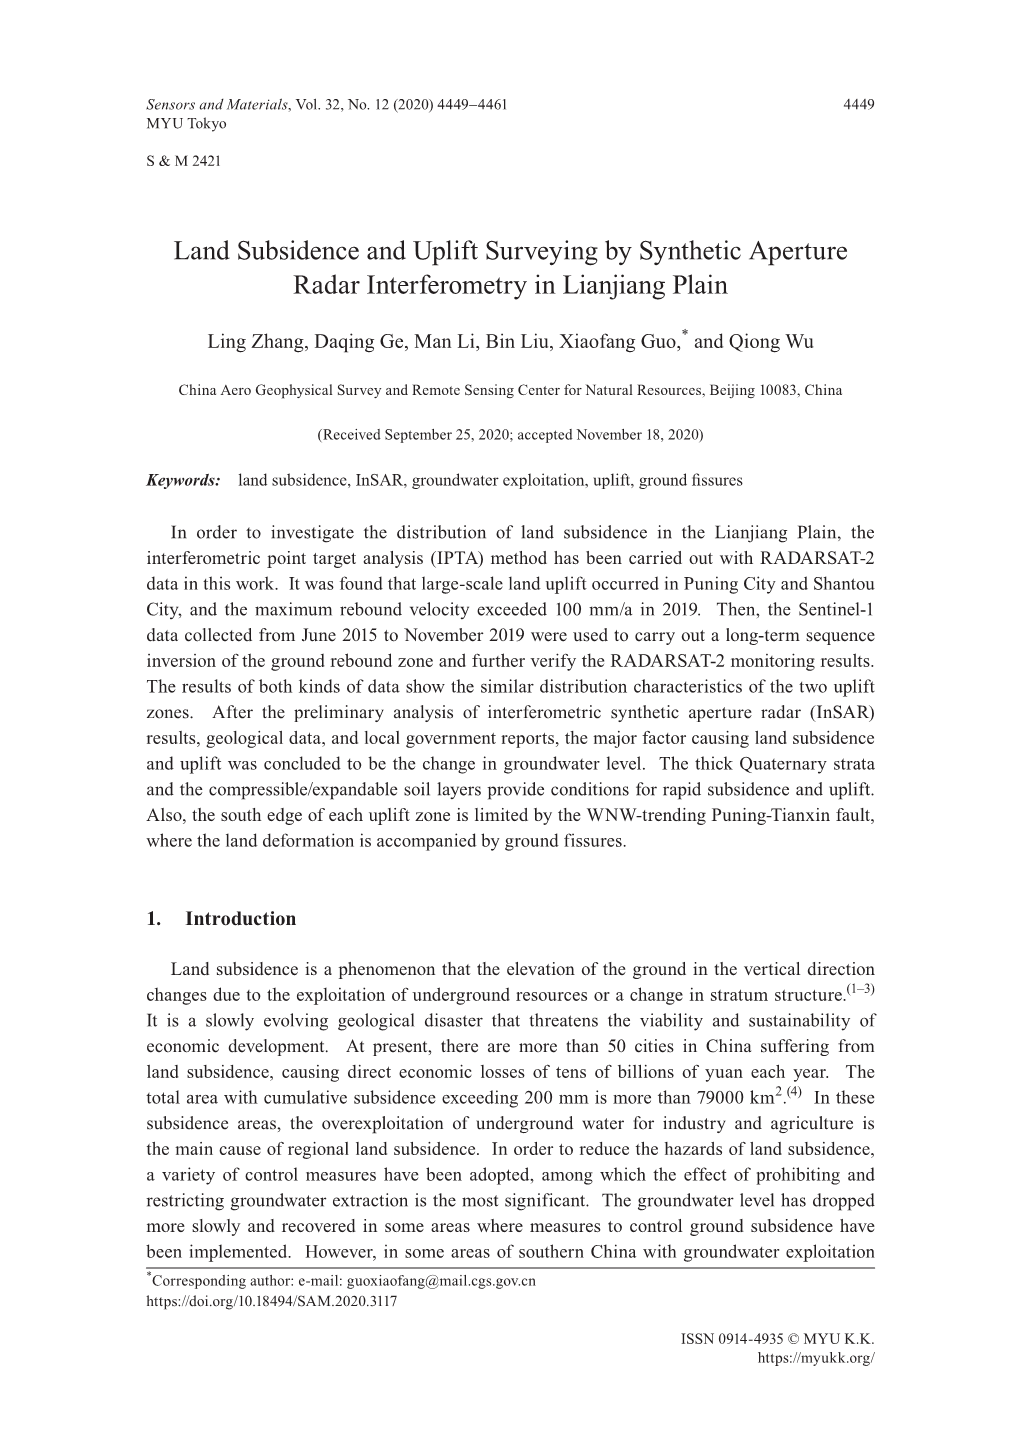 Land Subsidence and Uplift Surveying by Synthetic Aperture Radar Interferometry in Lianjiang Plain